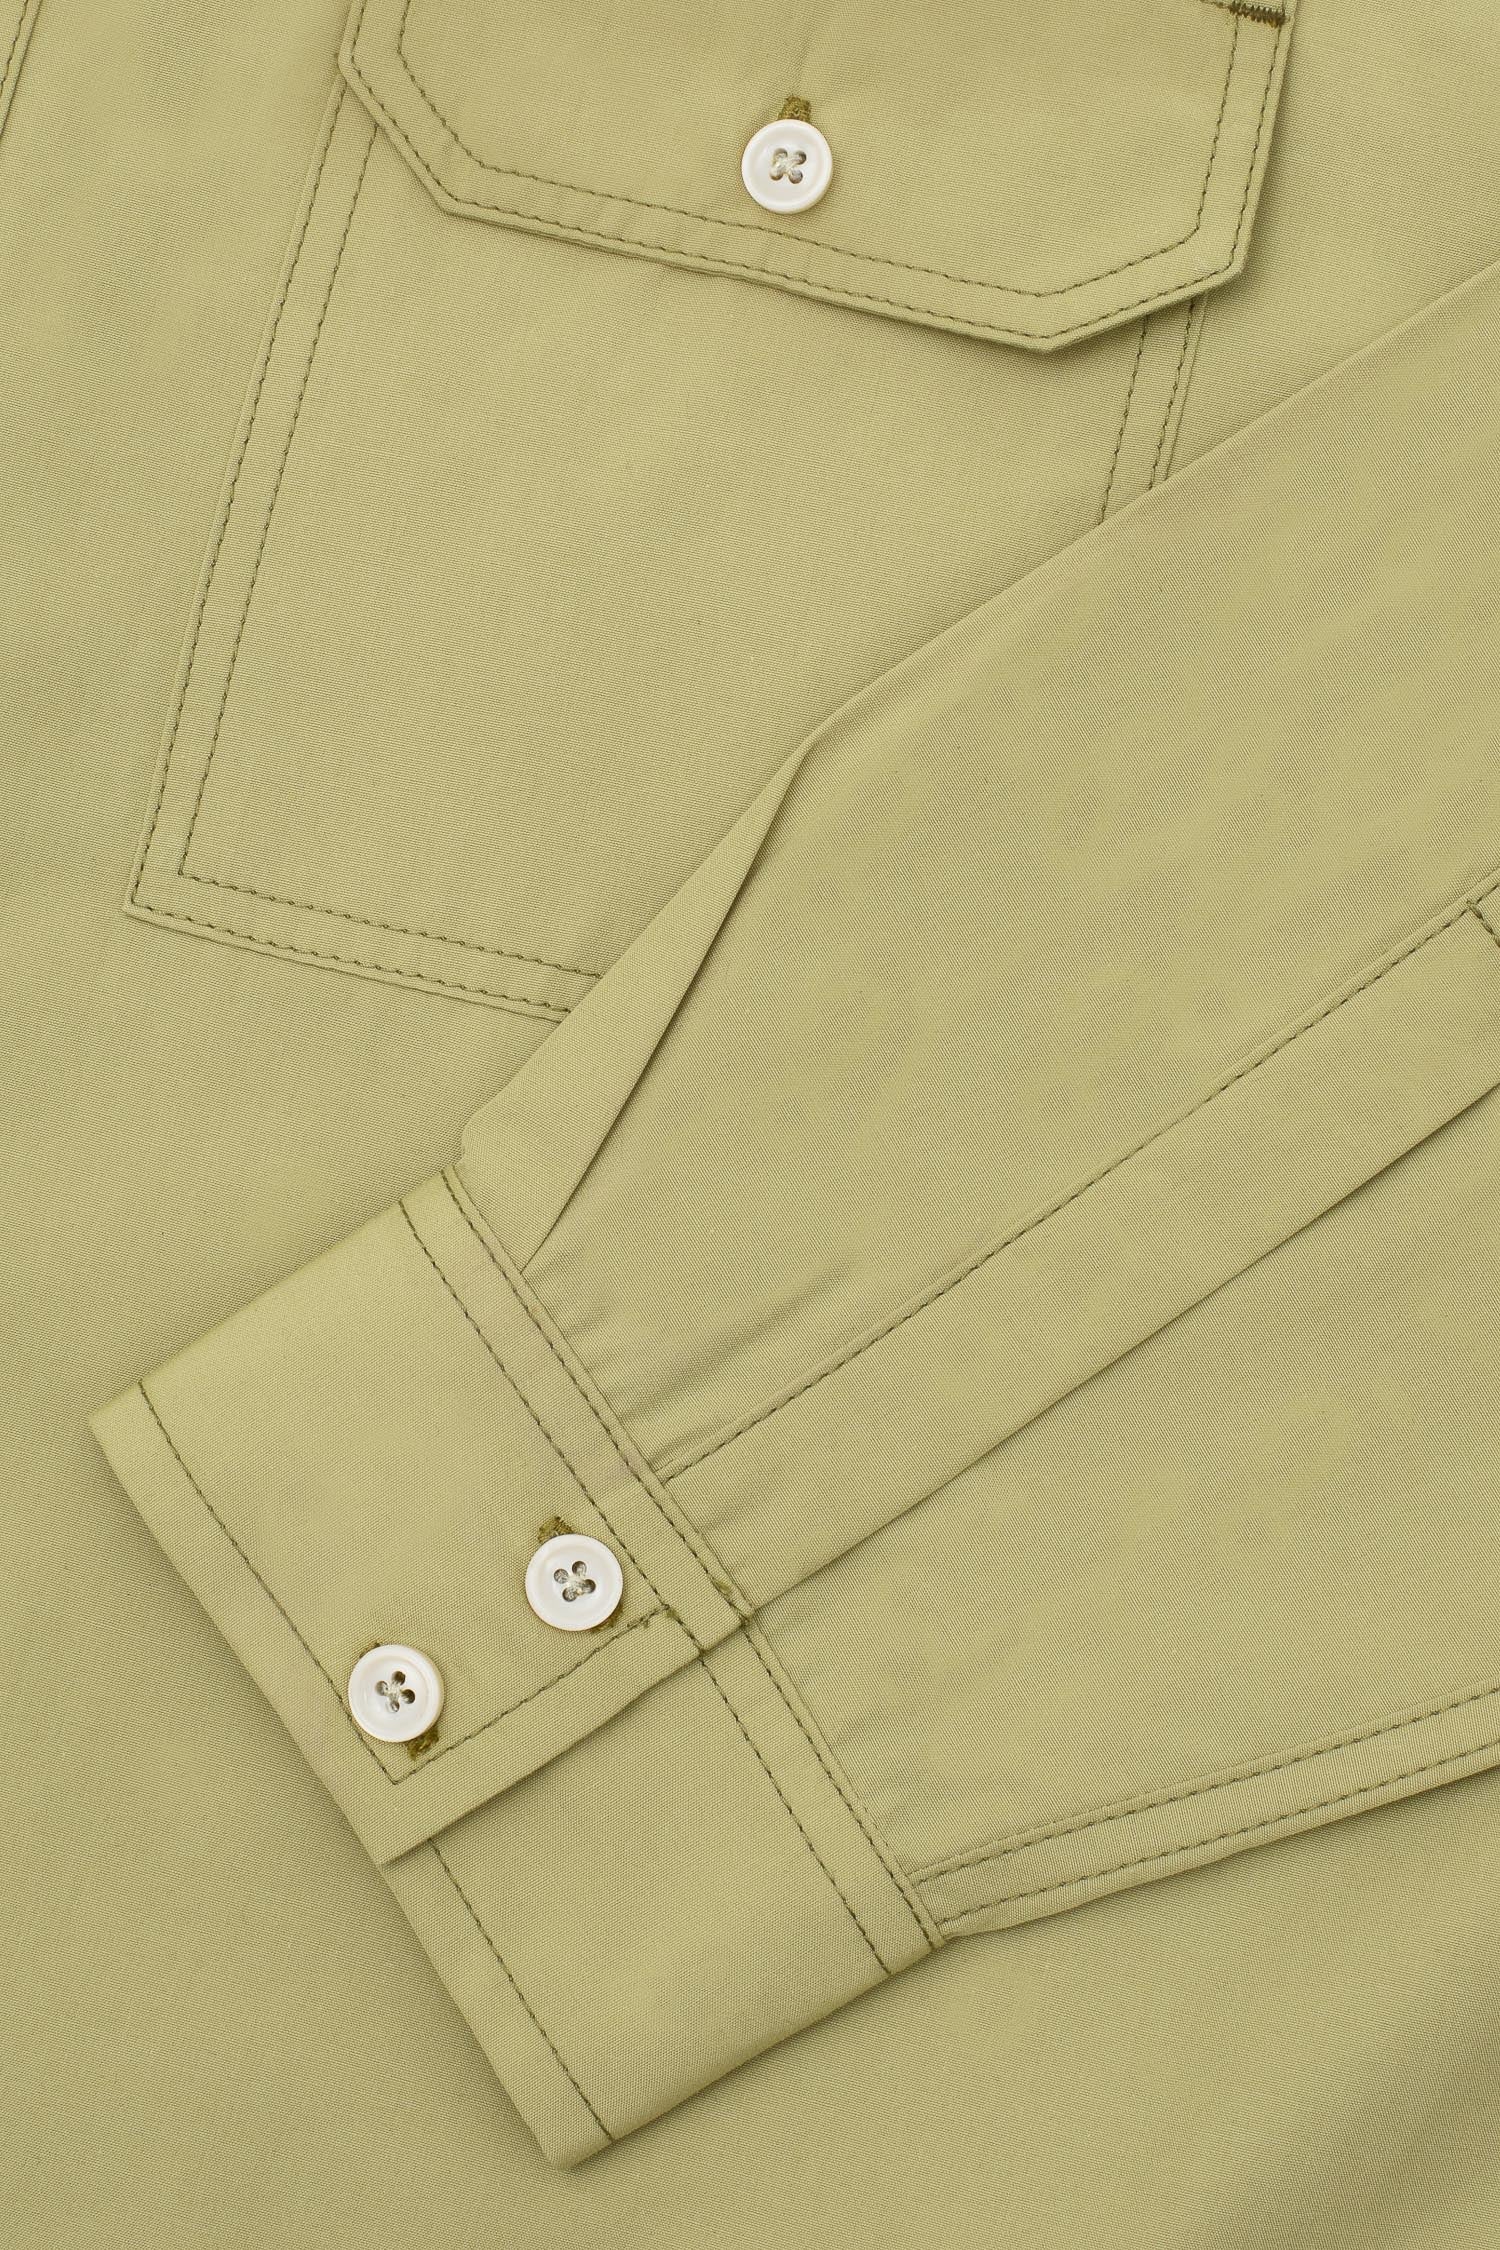 Mens Utility Shirt in olive khaki cotton. utility Patch Pocket details; the Eddy Shirt regular fit by Saywood. Close up of double button cuff and utility pocket.